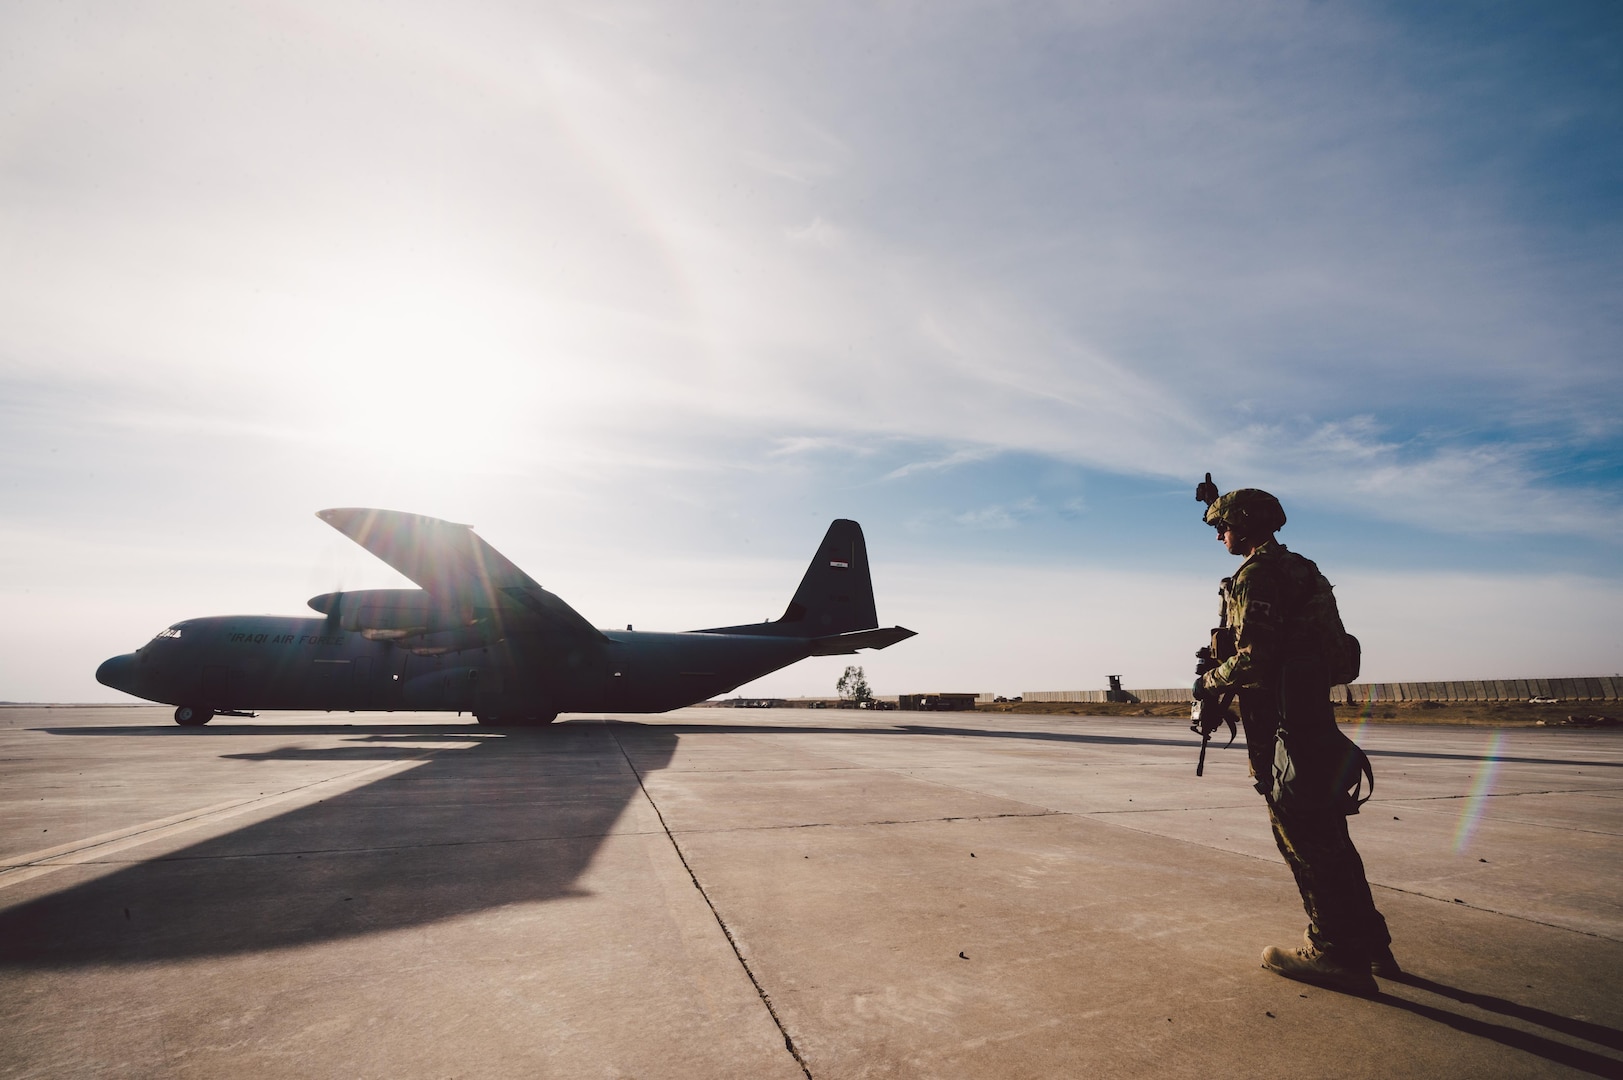 Senior Airman Zachery Hatfield, 821st Contingency Response Squadron crew chief, provides airfield security for an Iraqi air force C-130 at Qayyarah West Airfield, Iraq, in support of Combined Joint Task Force - Operation Inherent Resolve, Nov. 13, 2016. The 821st CRG is highly-specialized in training and rapidly deploying personnel to quickly open airfields and establish, expand, sustain and coordinate air operations in austere, bare-base conditions. (U.S. Air Force photo by Senior Airman Jordan Castelan)